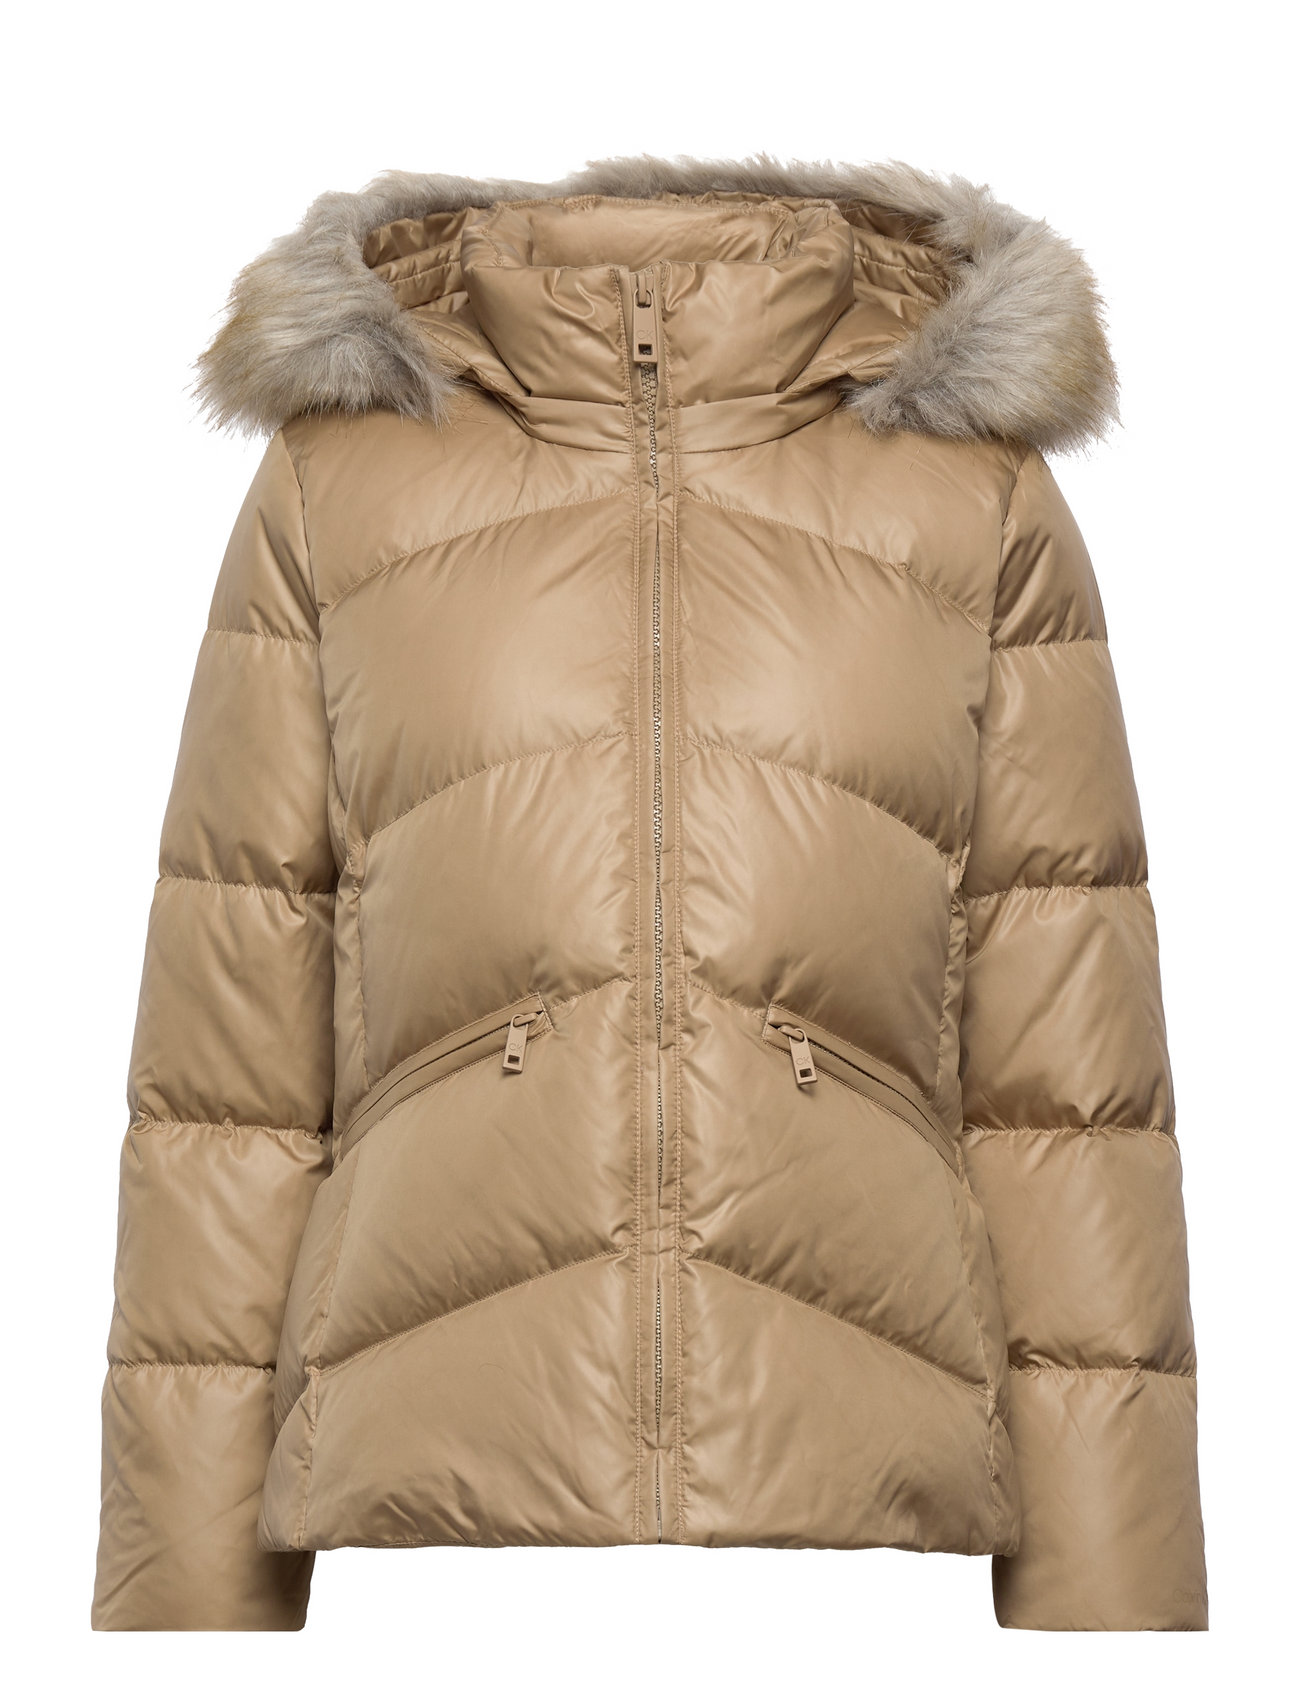 Calvin Klein Essential Real Down Fast online 349.90 Buy from Down- at and returns Boozt.com. Calvin Klein easy & delivery padded jackets - Jacket €